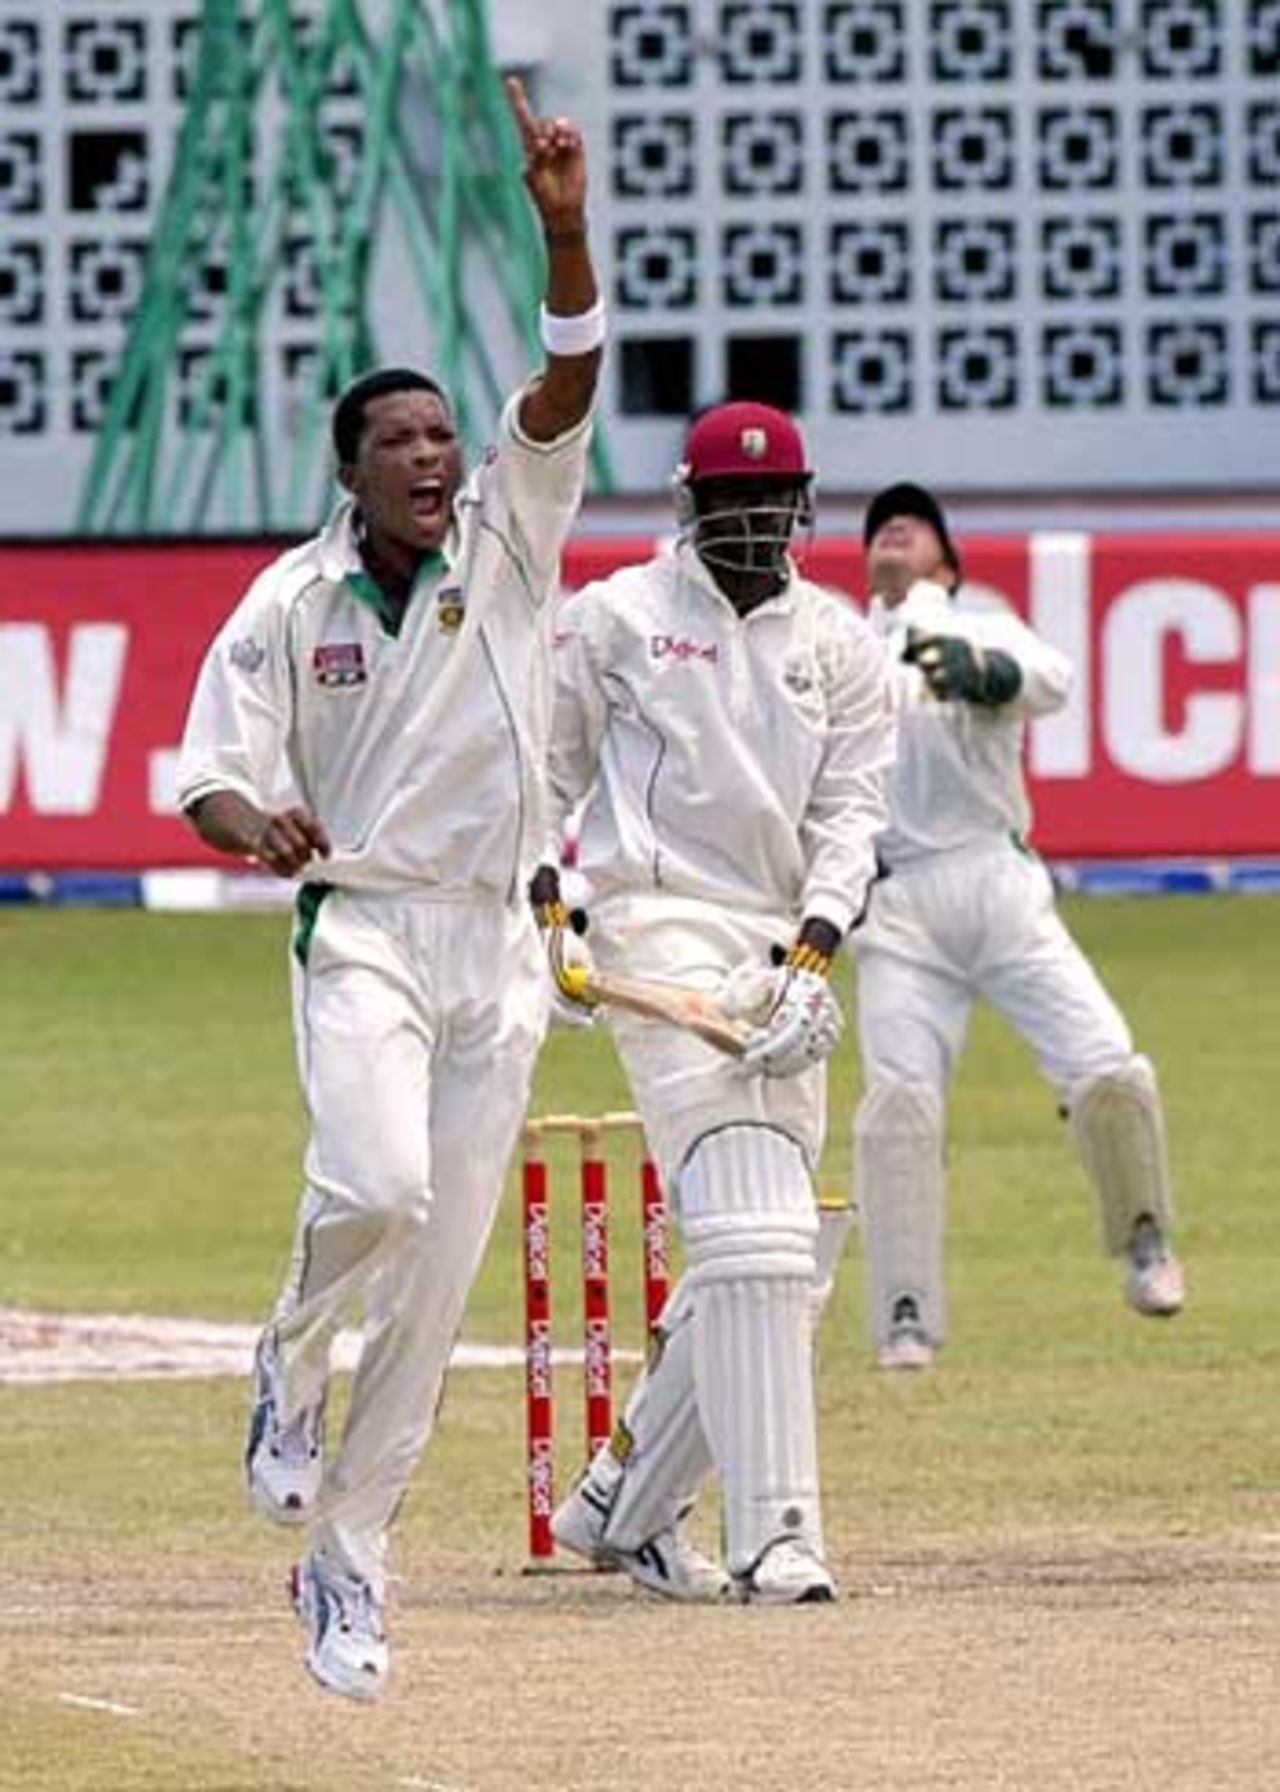 Makhaya Ntini appeals for the wicket of Chris Gayle on the 4th day of the 3rd Test in Barbados